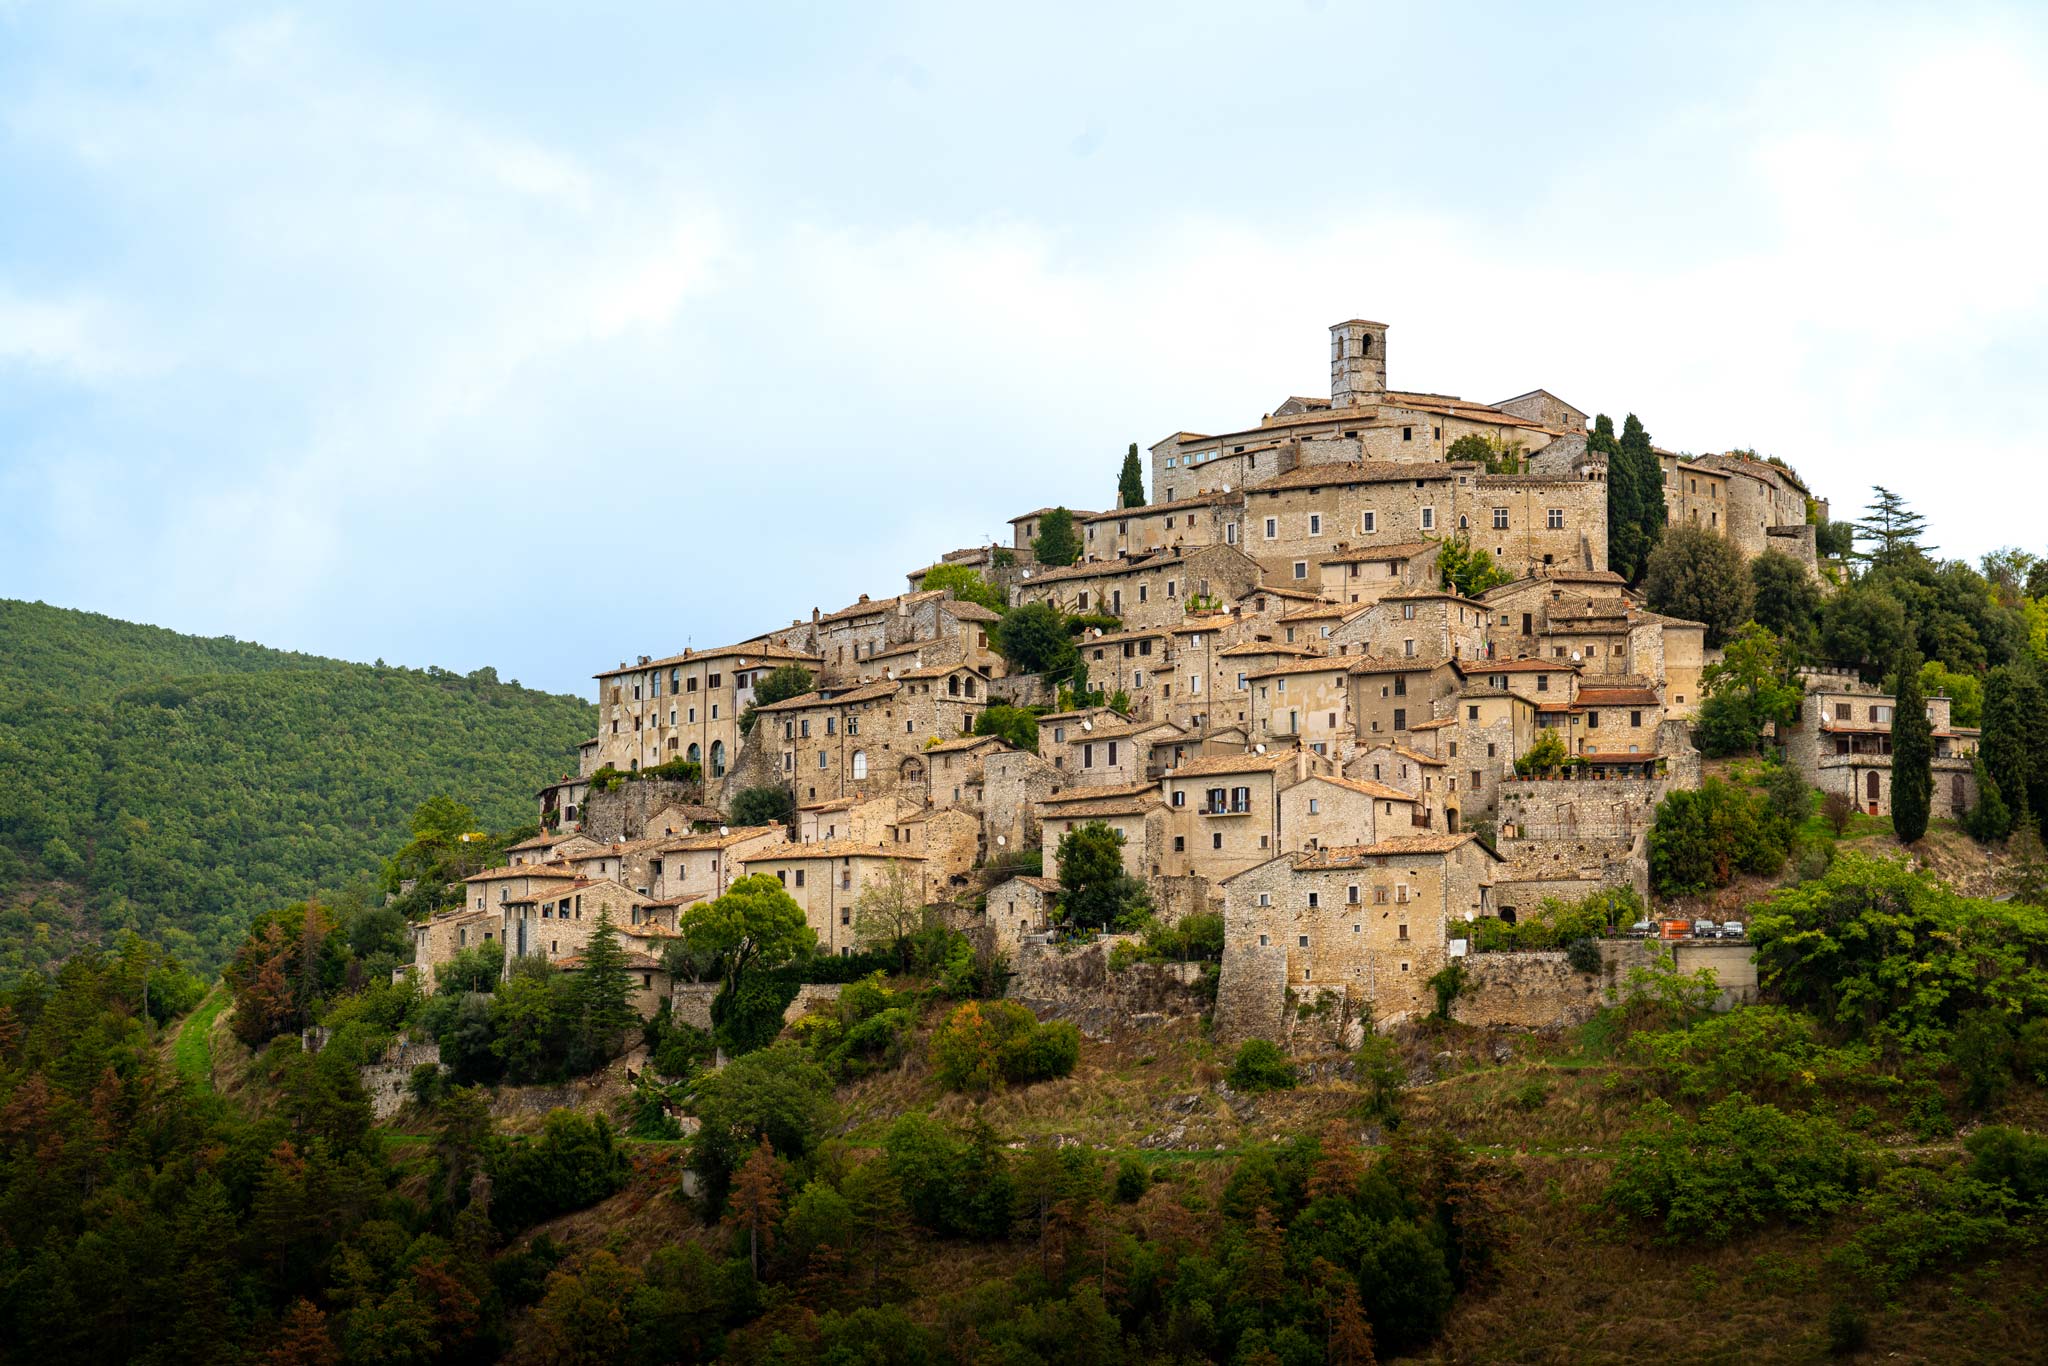 Labro seen from afar, one of the most beautiful villages near Rome